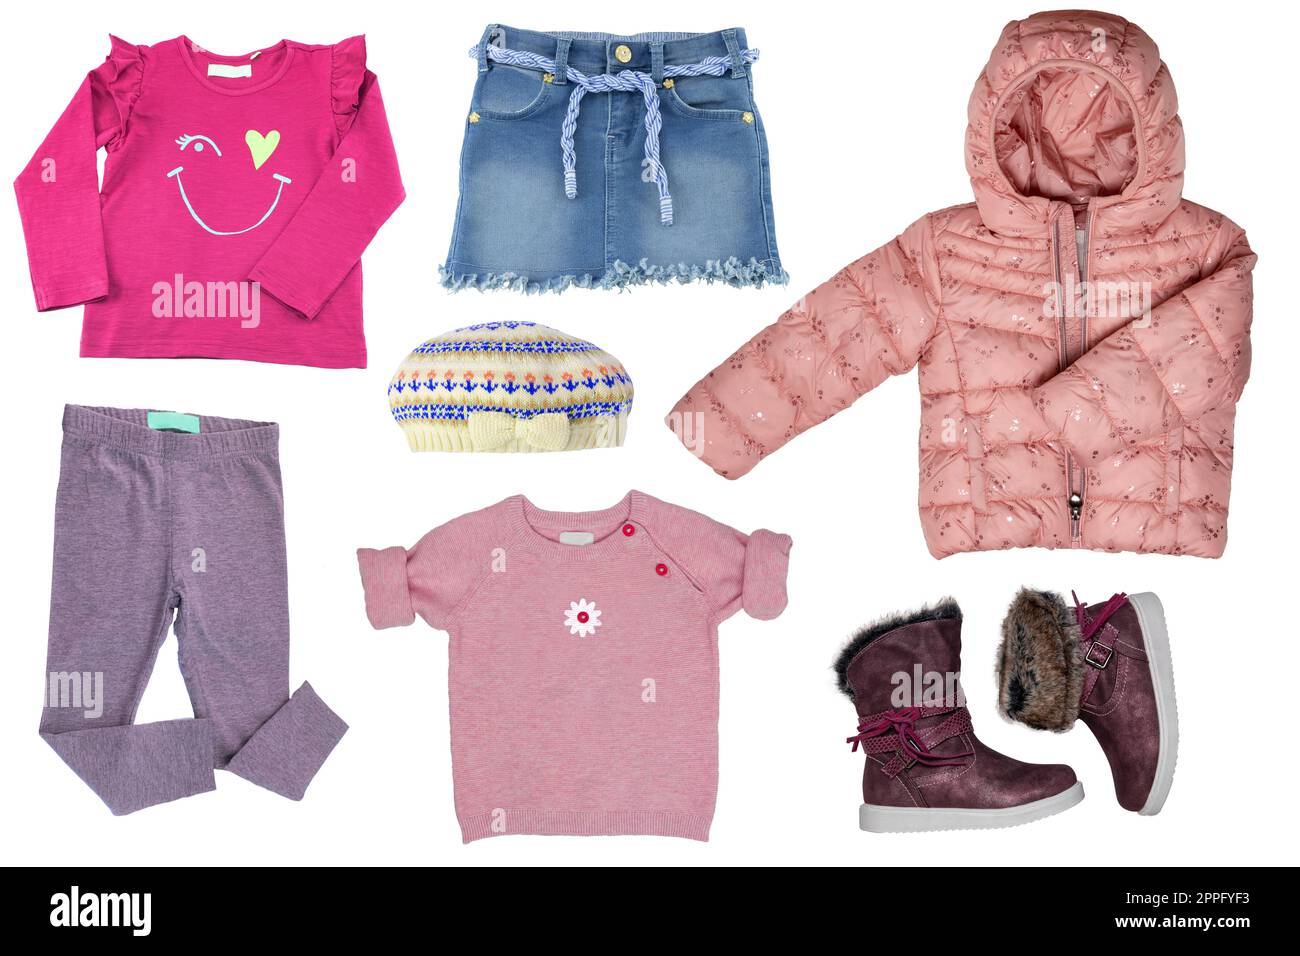 Collage set of clothes for a little girl isolated on a white background. The collection of a jeans skirt, a shirt and rain jacket, shirt and rain jacket, pants, sweater and boots. Stock Photo